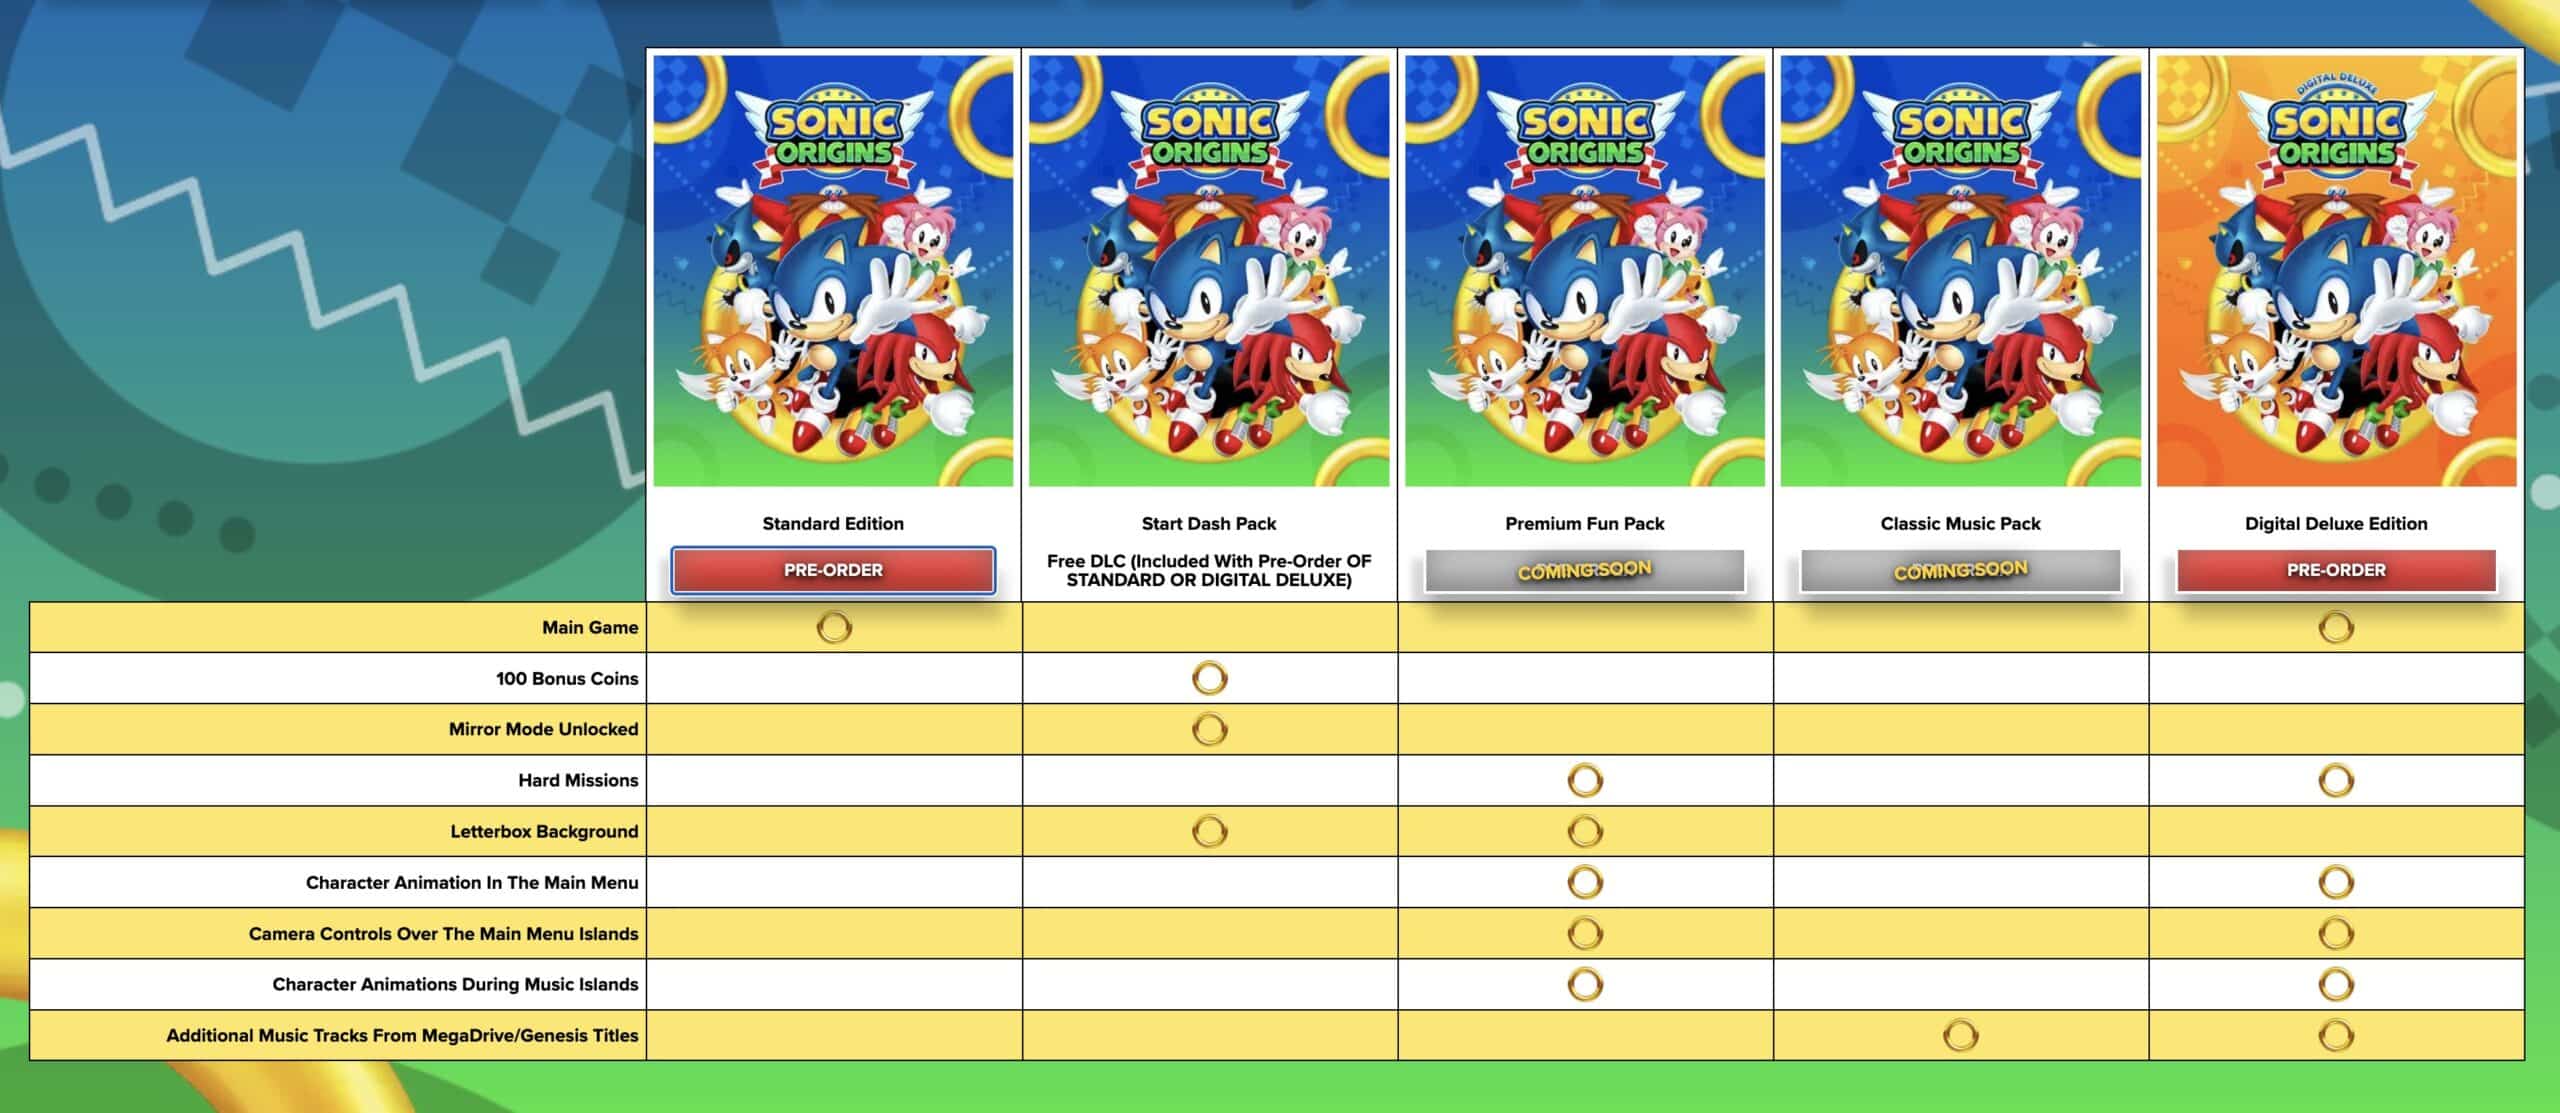 Sonic Origins Editions Overview